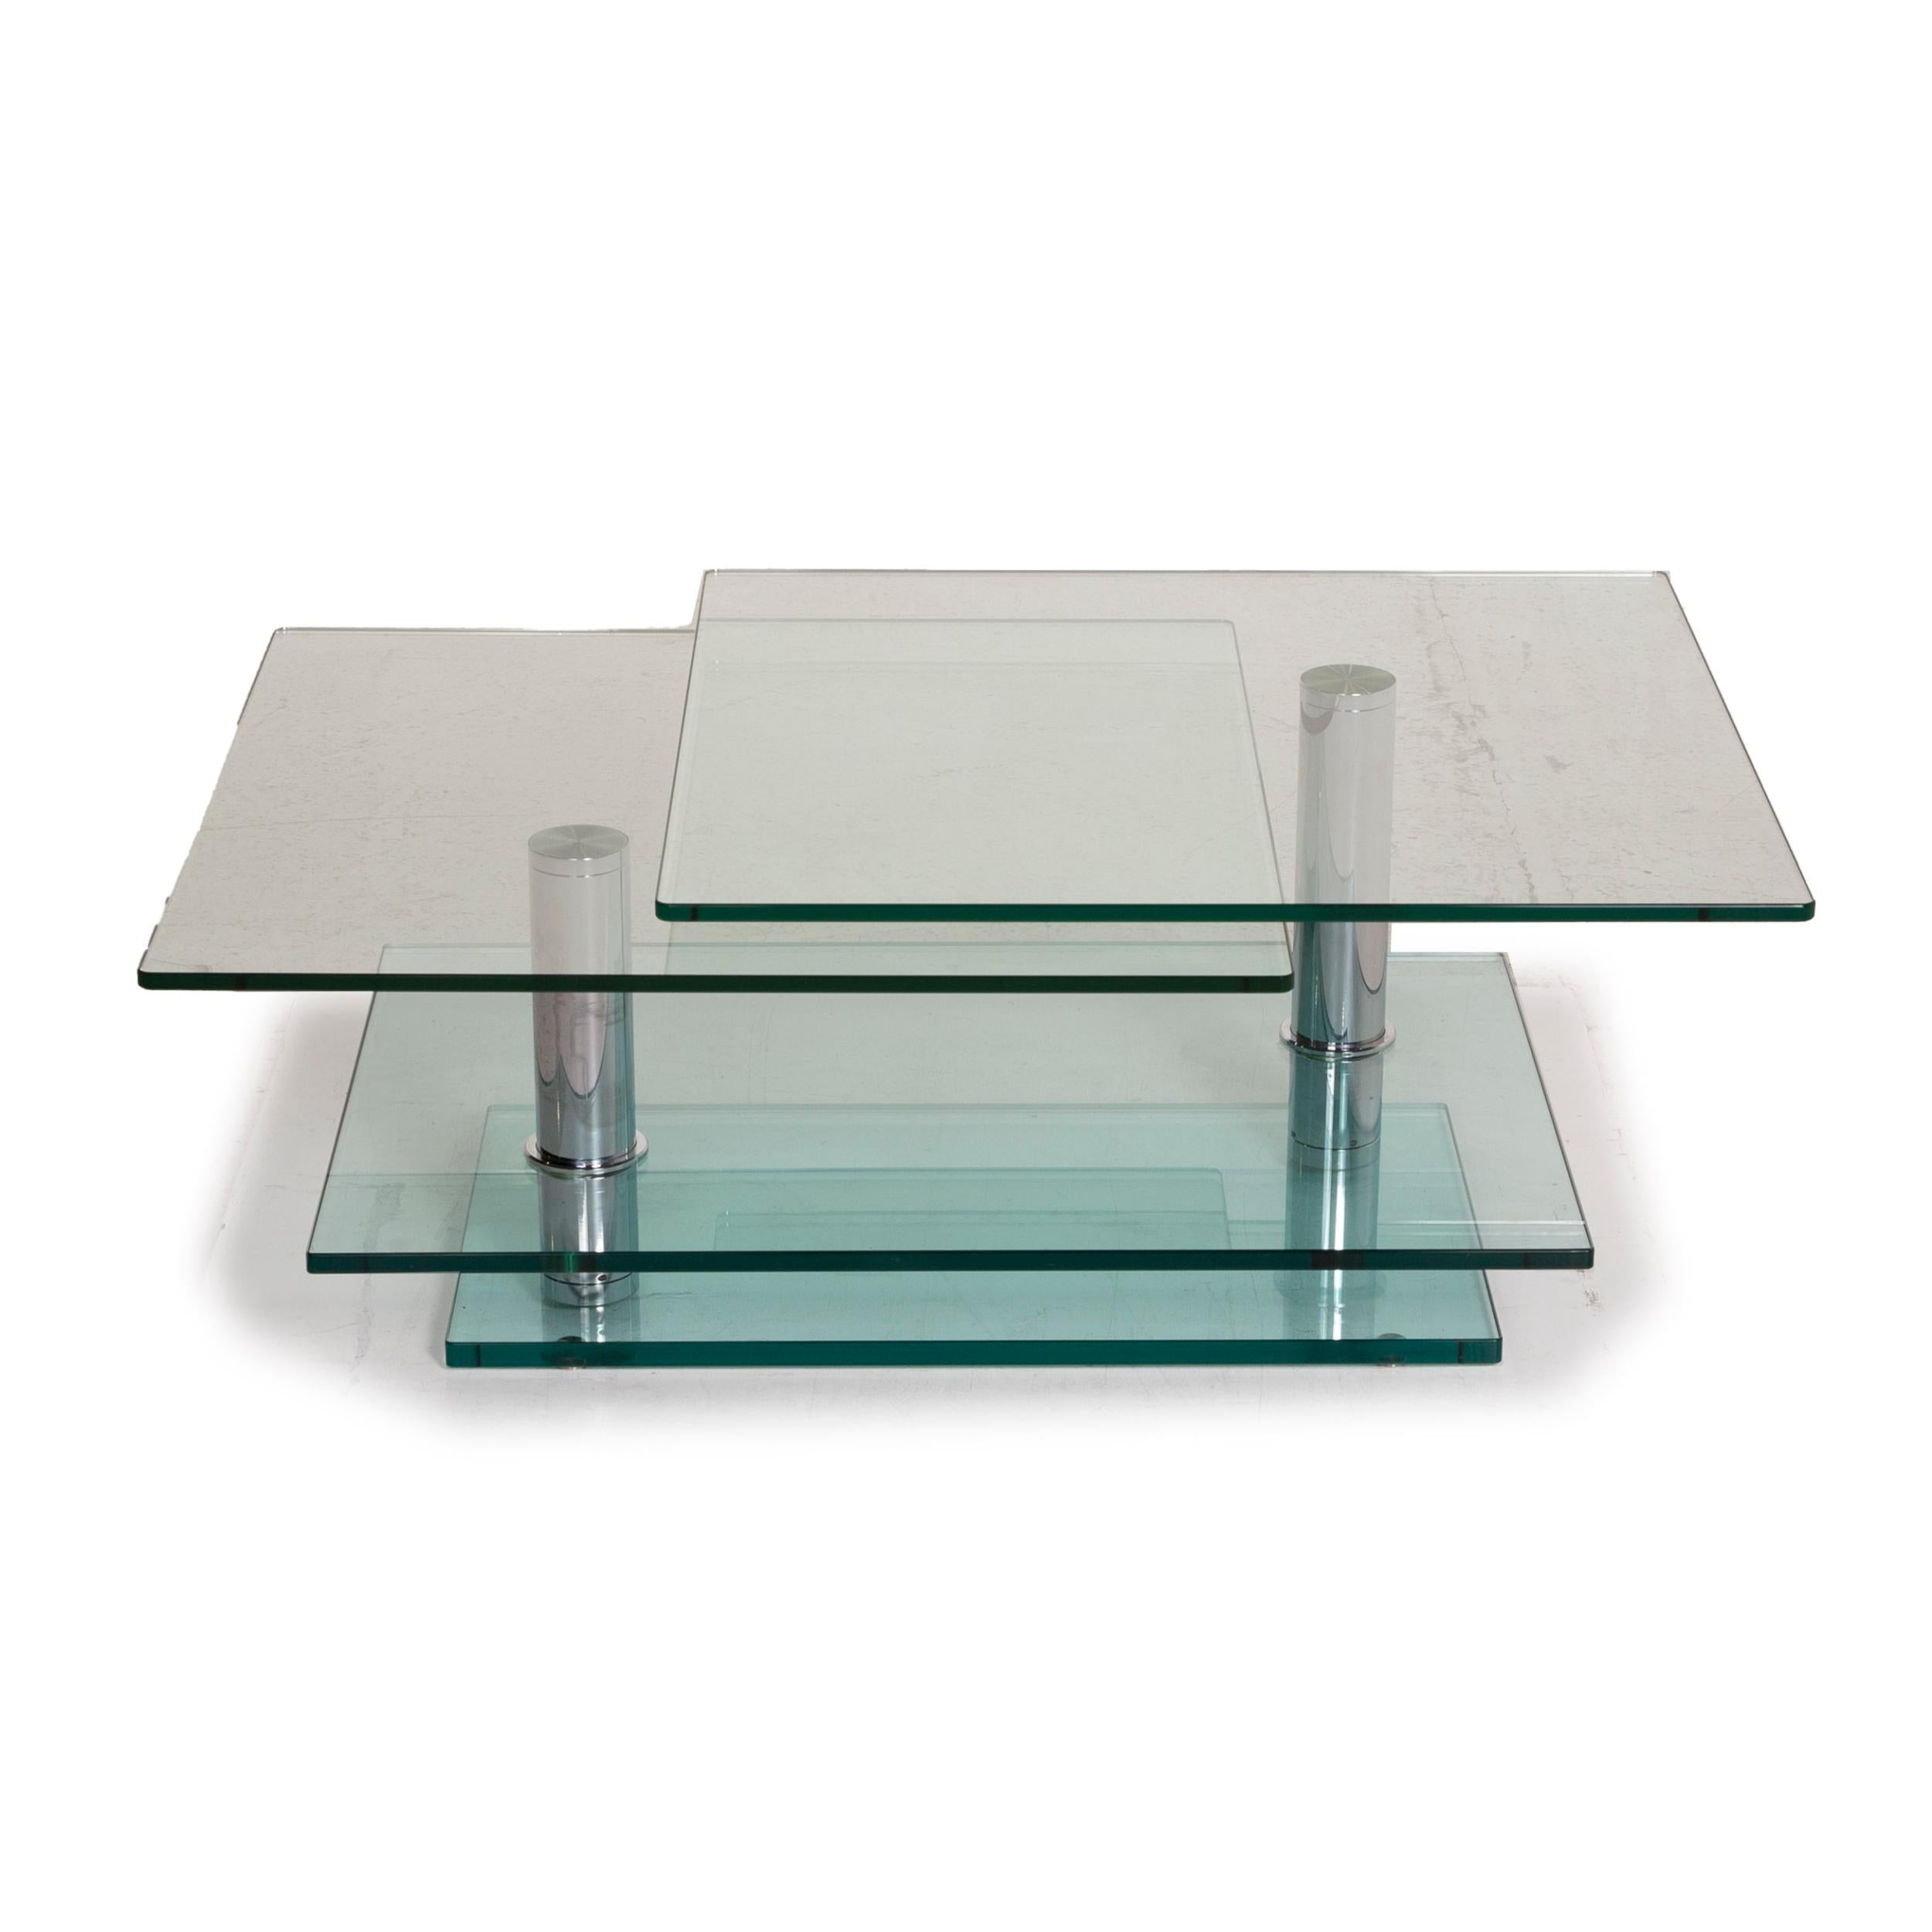 Contemporary Ronald Schmitt K500 Glass Table Coffee Table Chrome Function For Sale